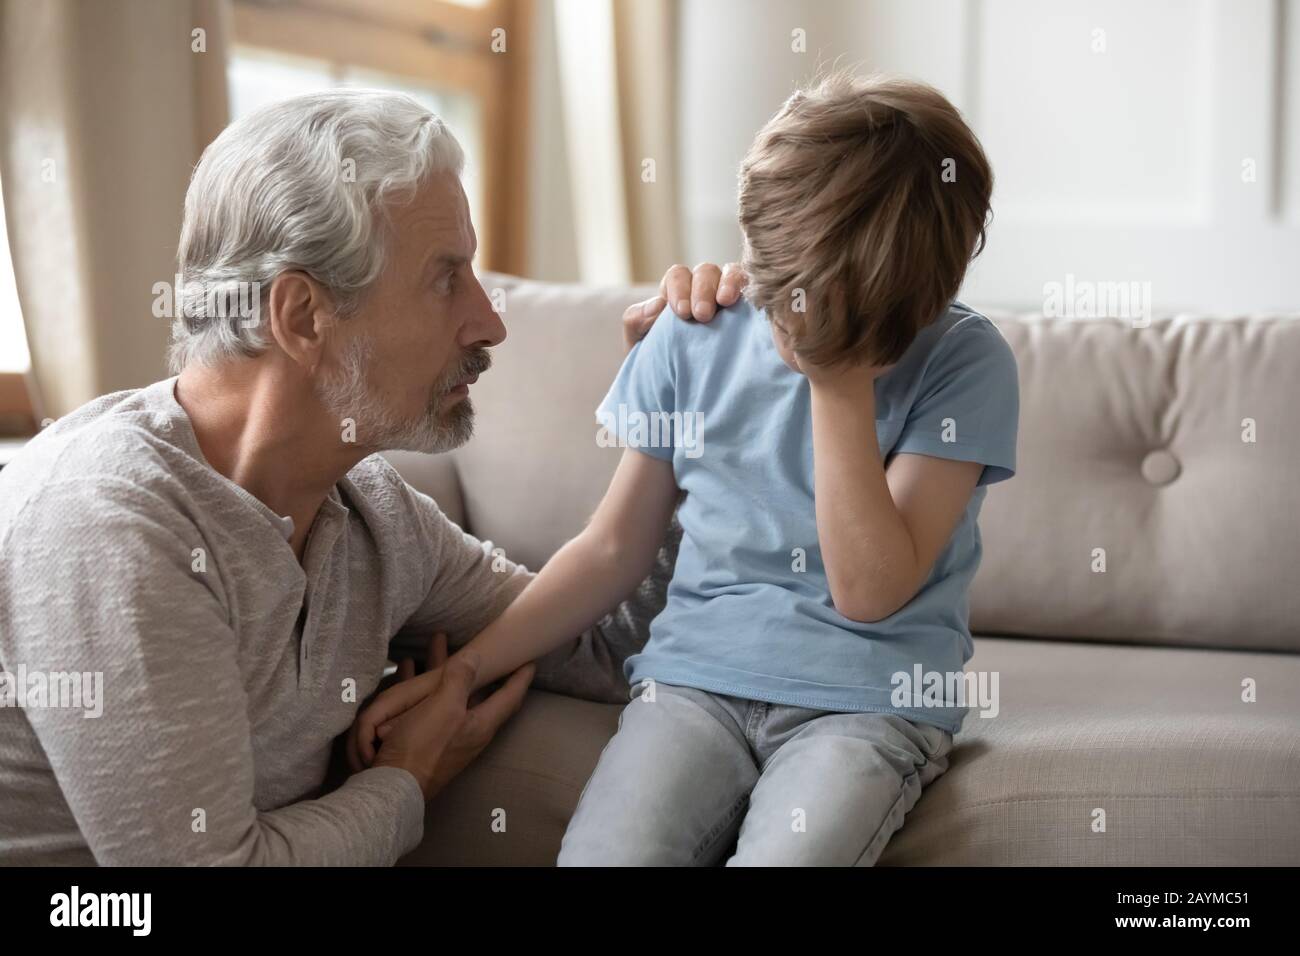 Worried middle aged hoary man supporting little offended grandchild. Stock Photo